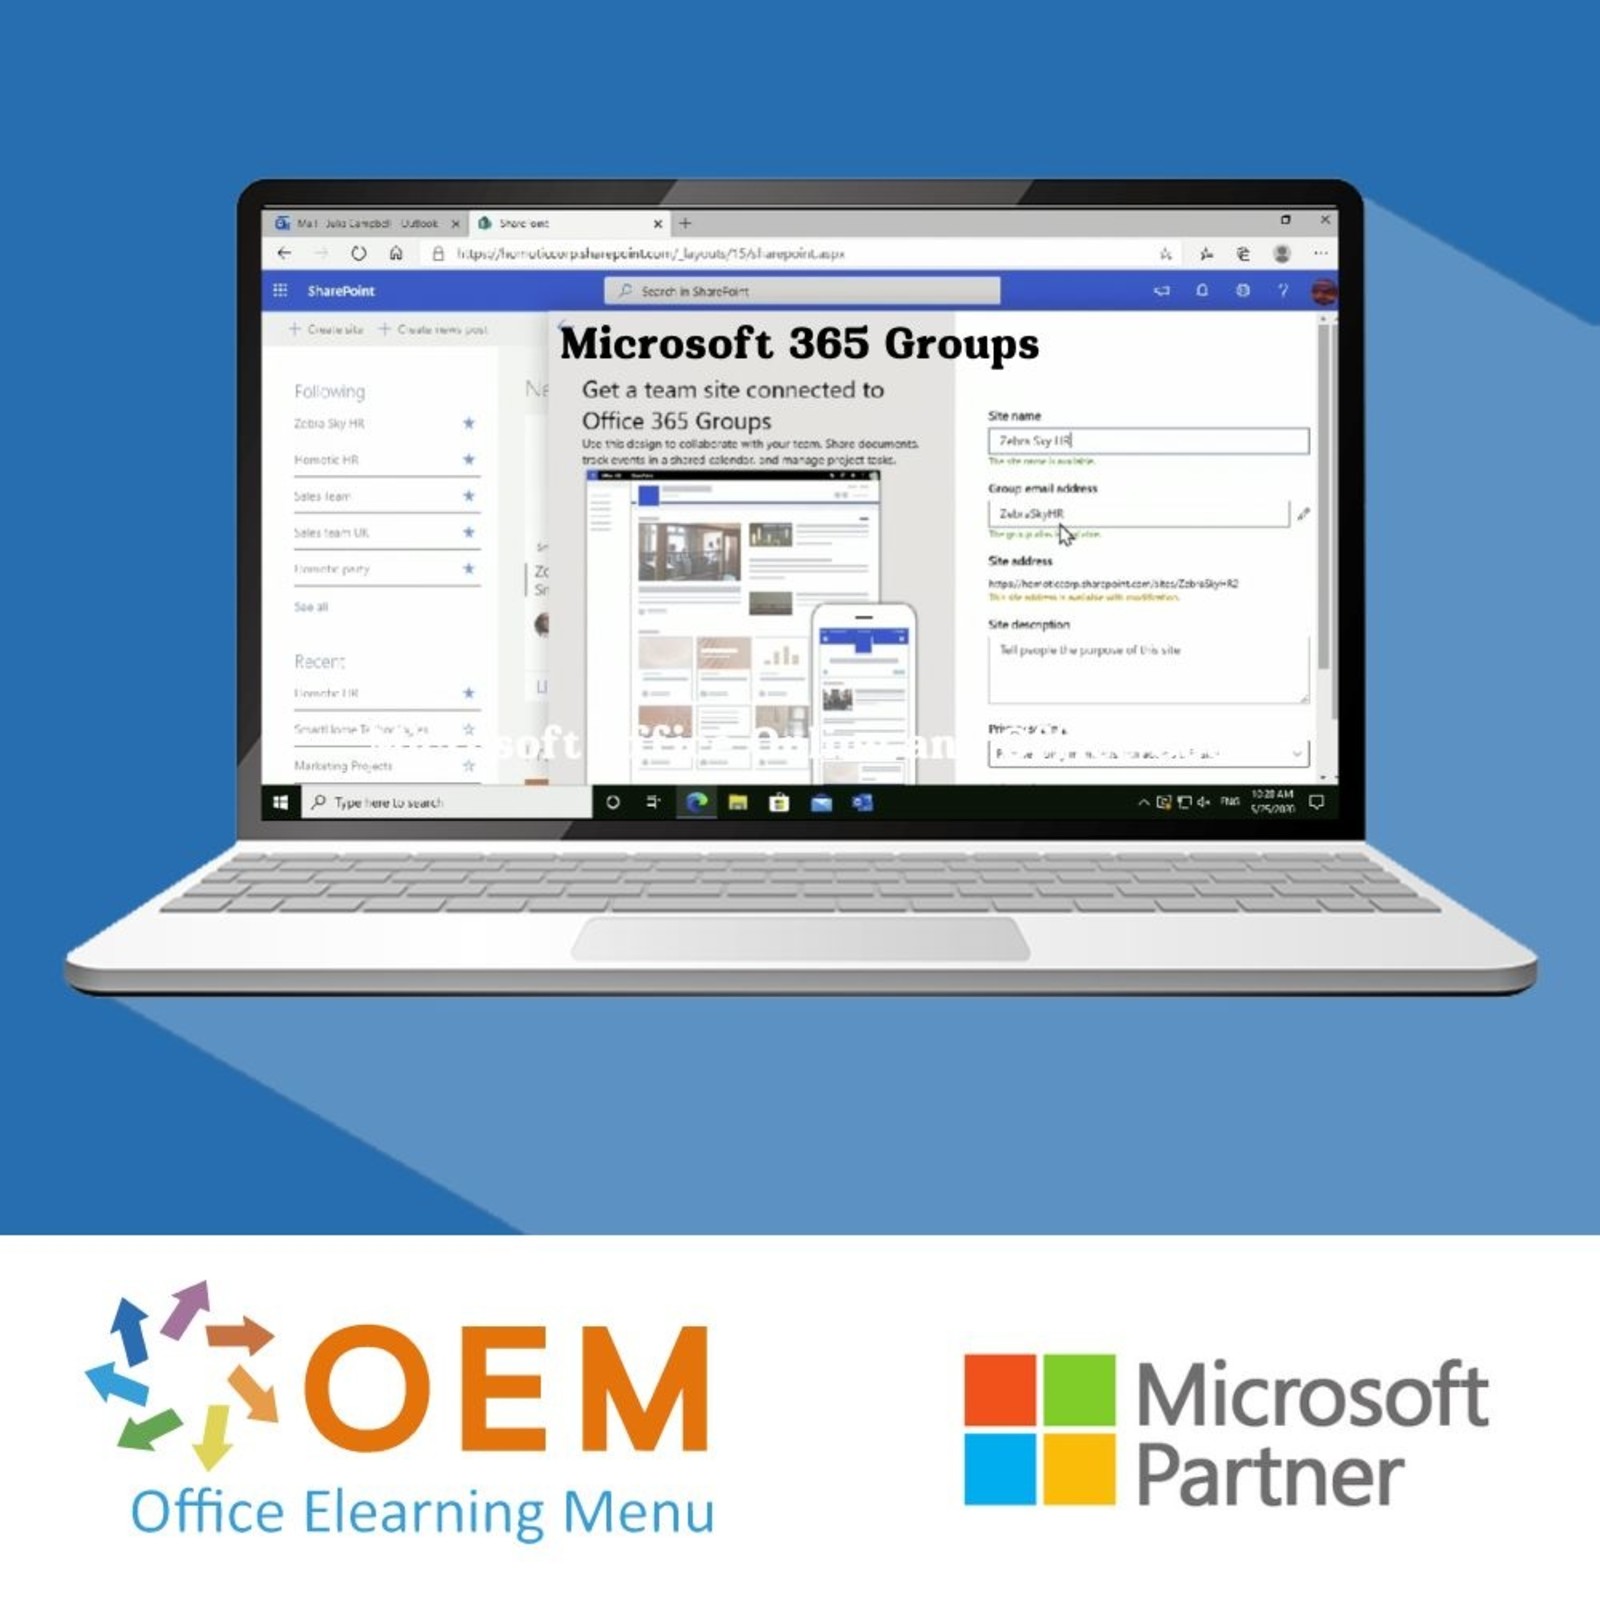 Microsoft Office 365 Training: Cloud Productiviteit Microsoft 365 Groups Course E-Learning